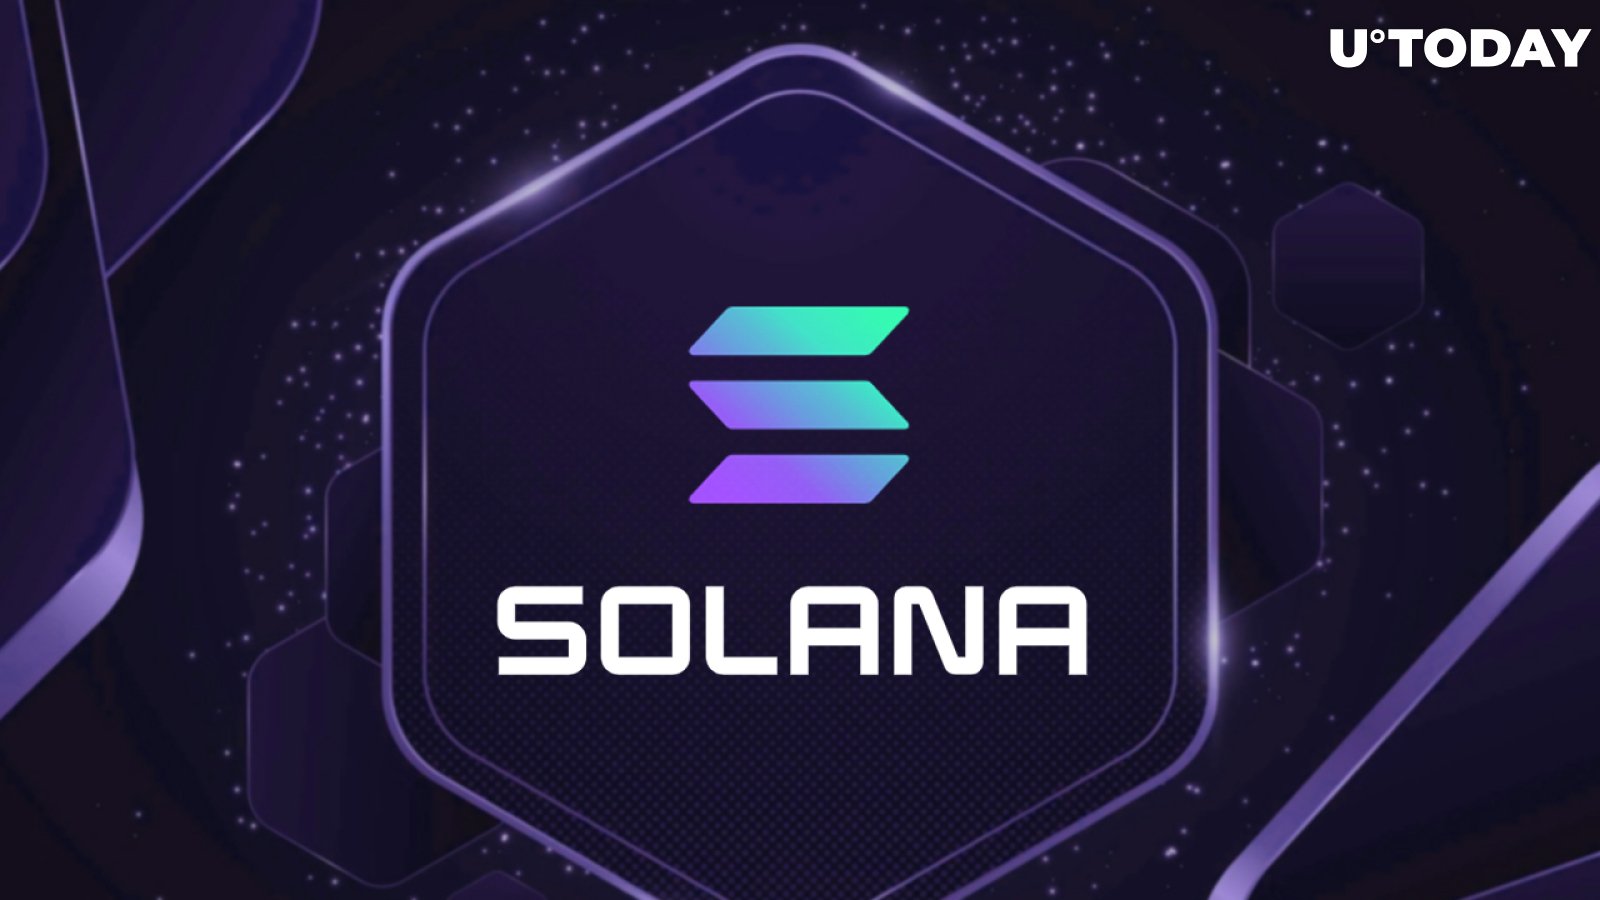 Solana Downtime Series Continues, Network Faces Serious Issues Again